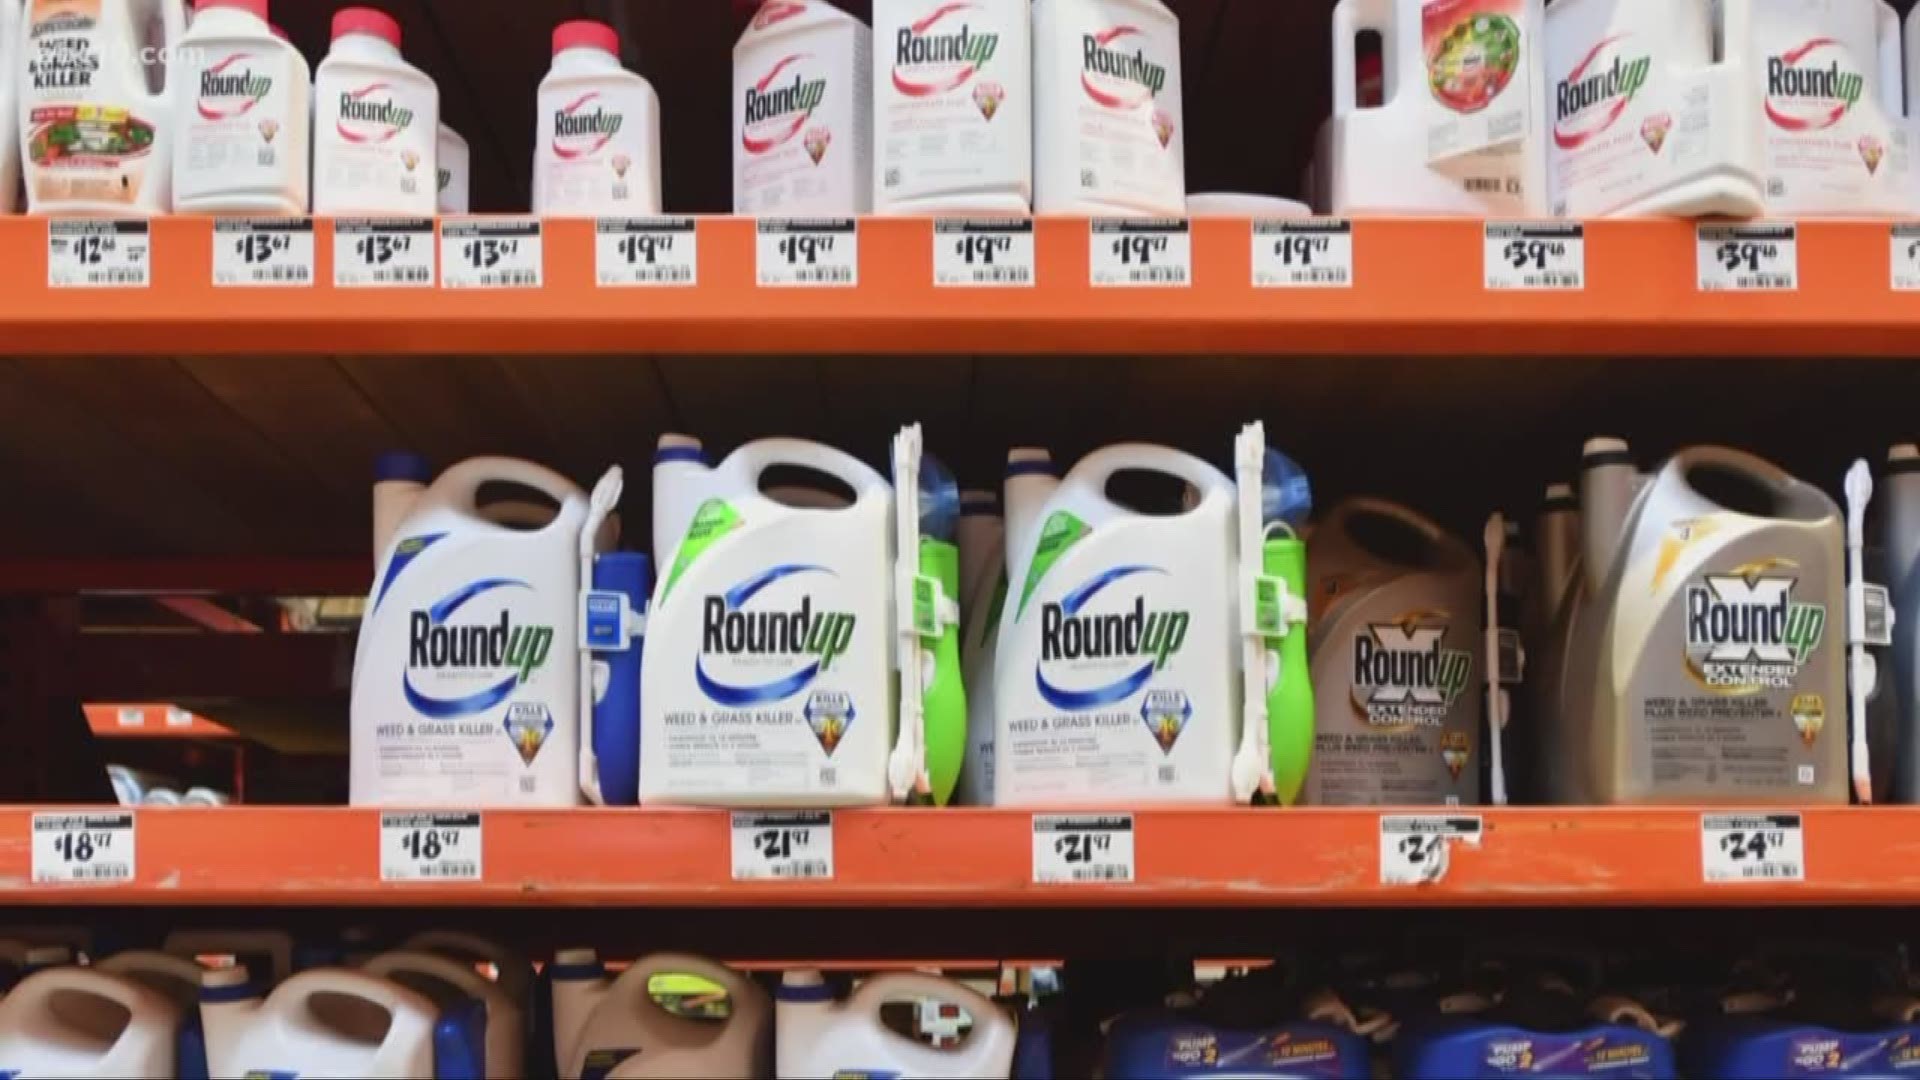 Roundup weed killer was a substantial factor in a California man's cancer, a jury determined Tuesday in the first phase of a trial that attorneys said could help determine the fate of hundreds of similar lawsuits.